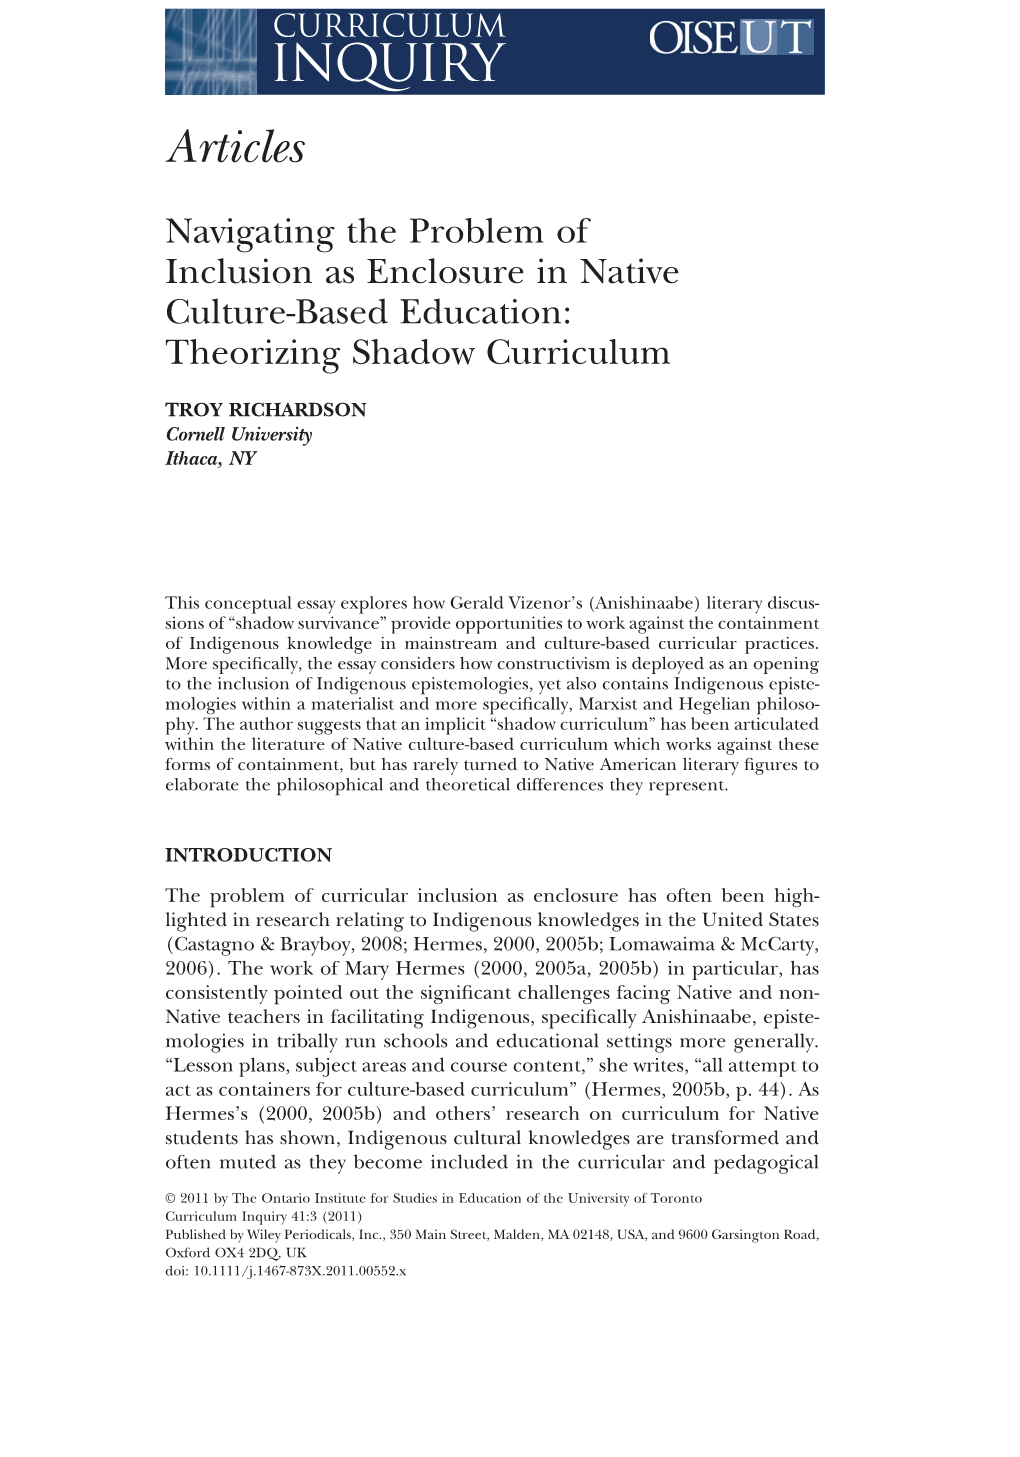 Navigating the Problem of Inclusion As Enclosure in Native Culturebased Education: Theorizing Shadow Curriculum